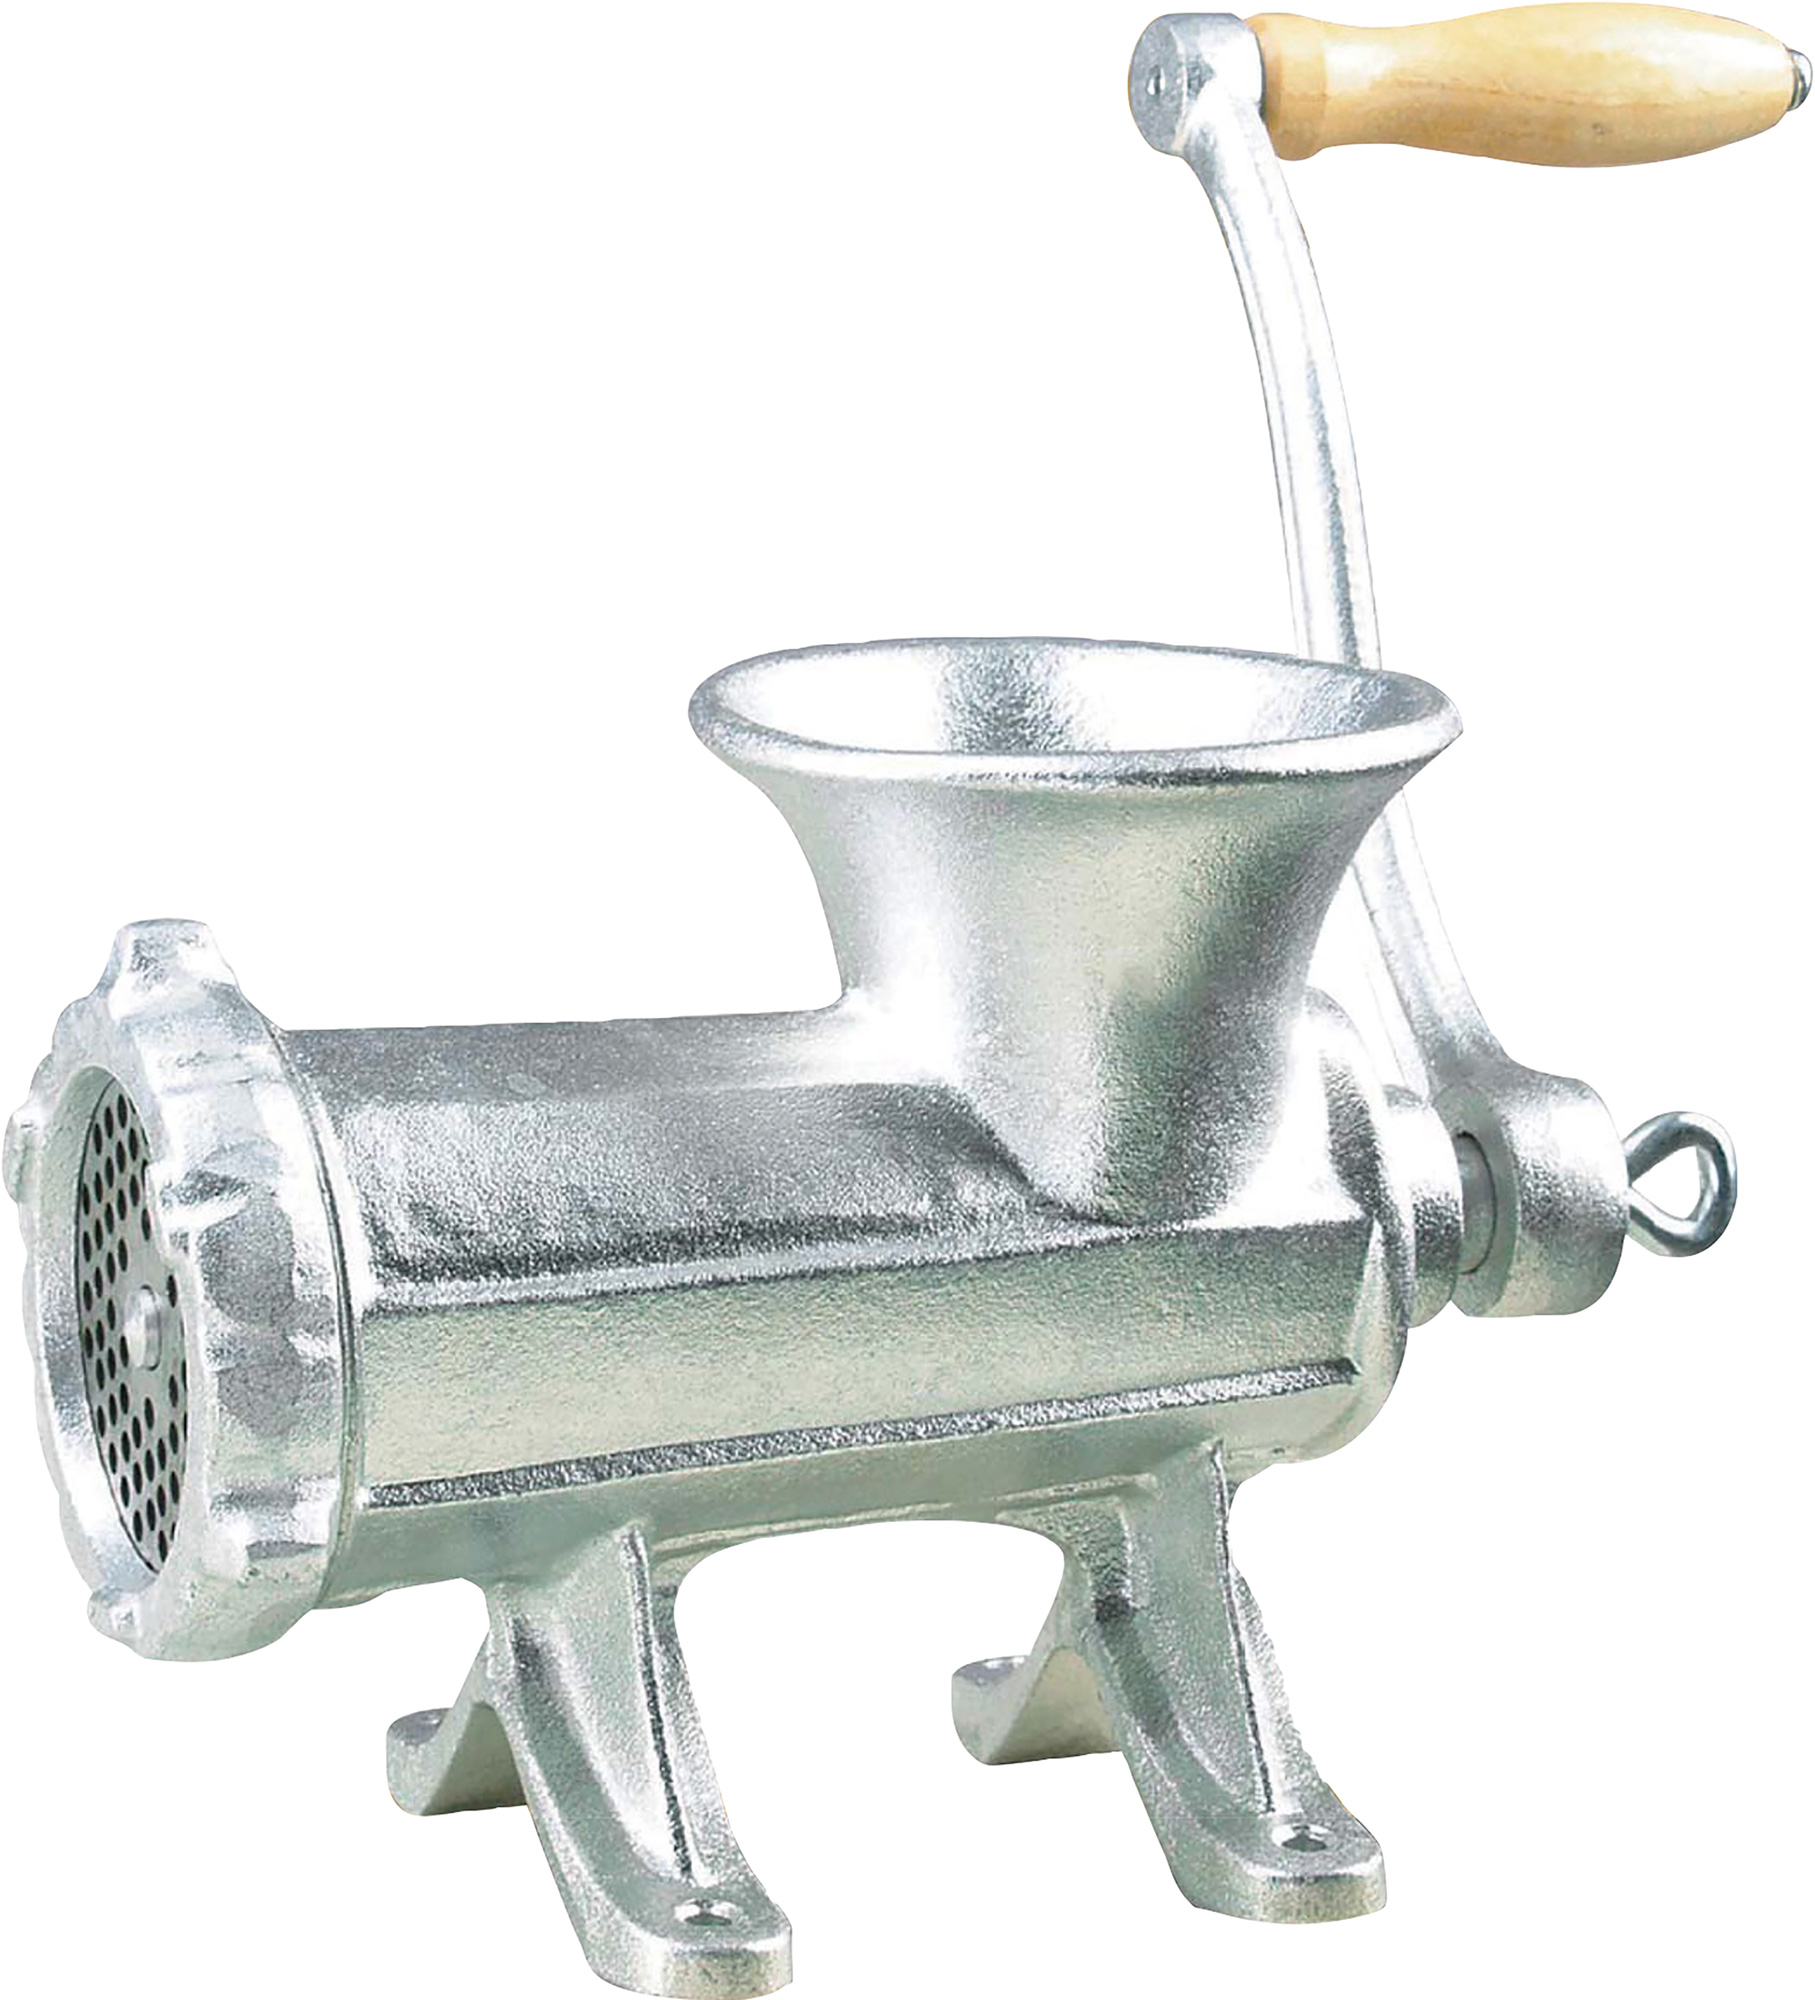 Manual Meat Grinders For Sale